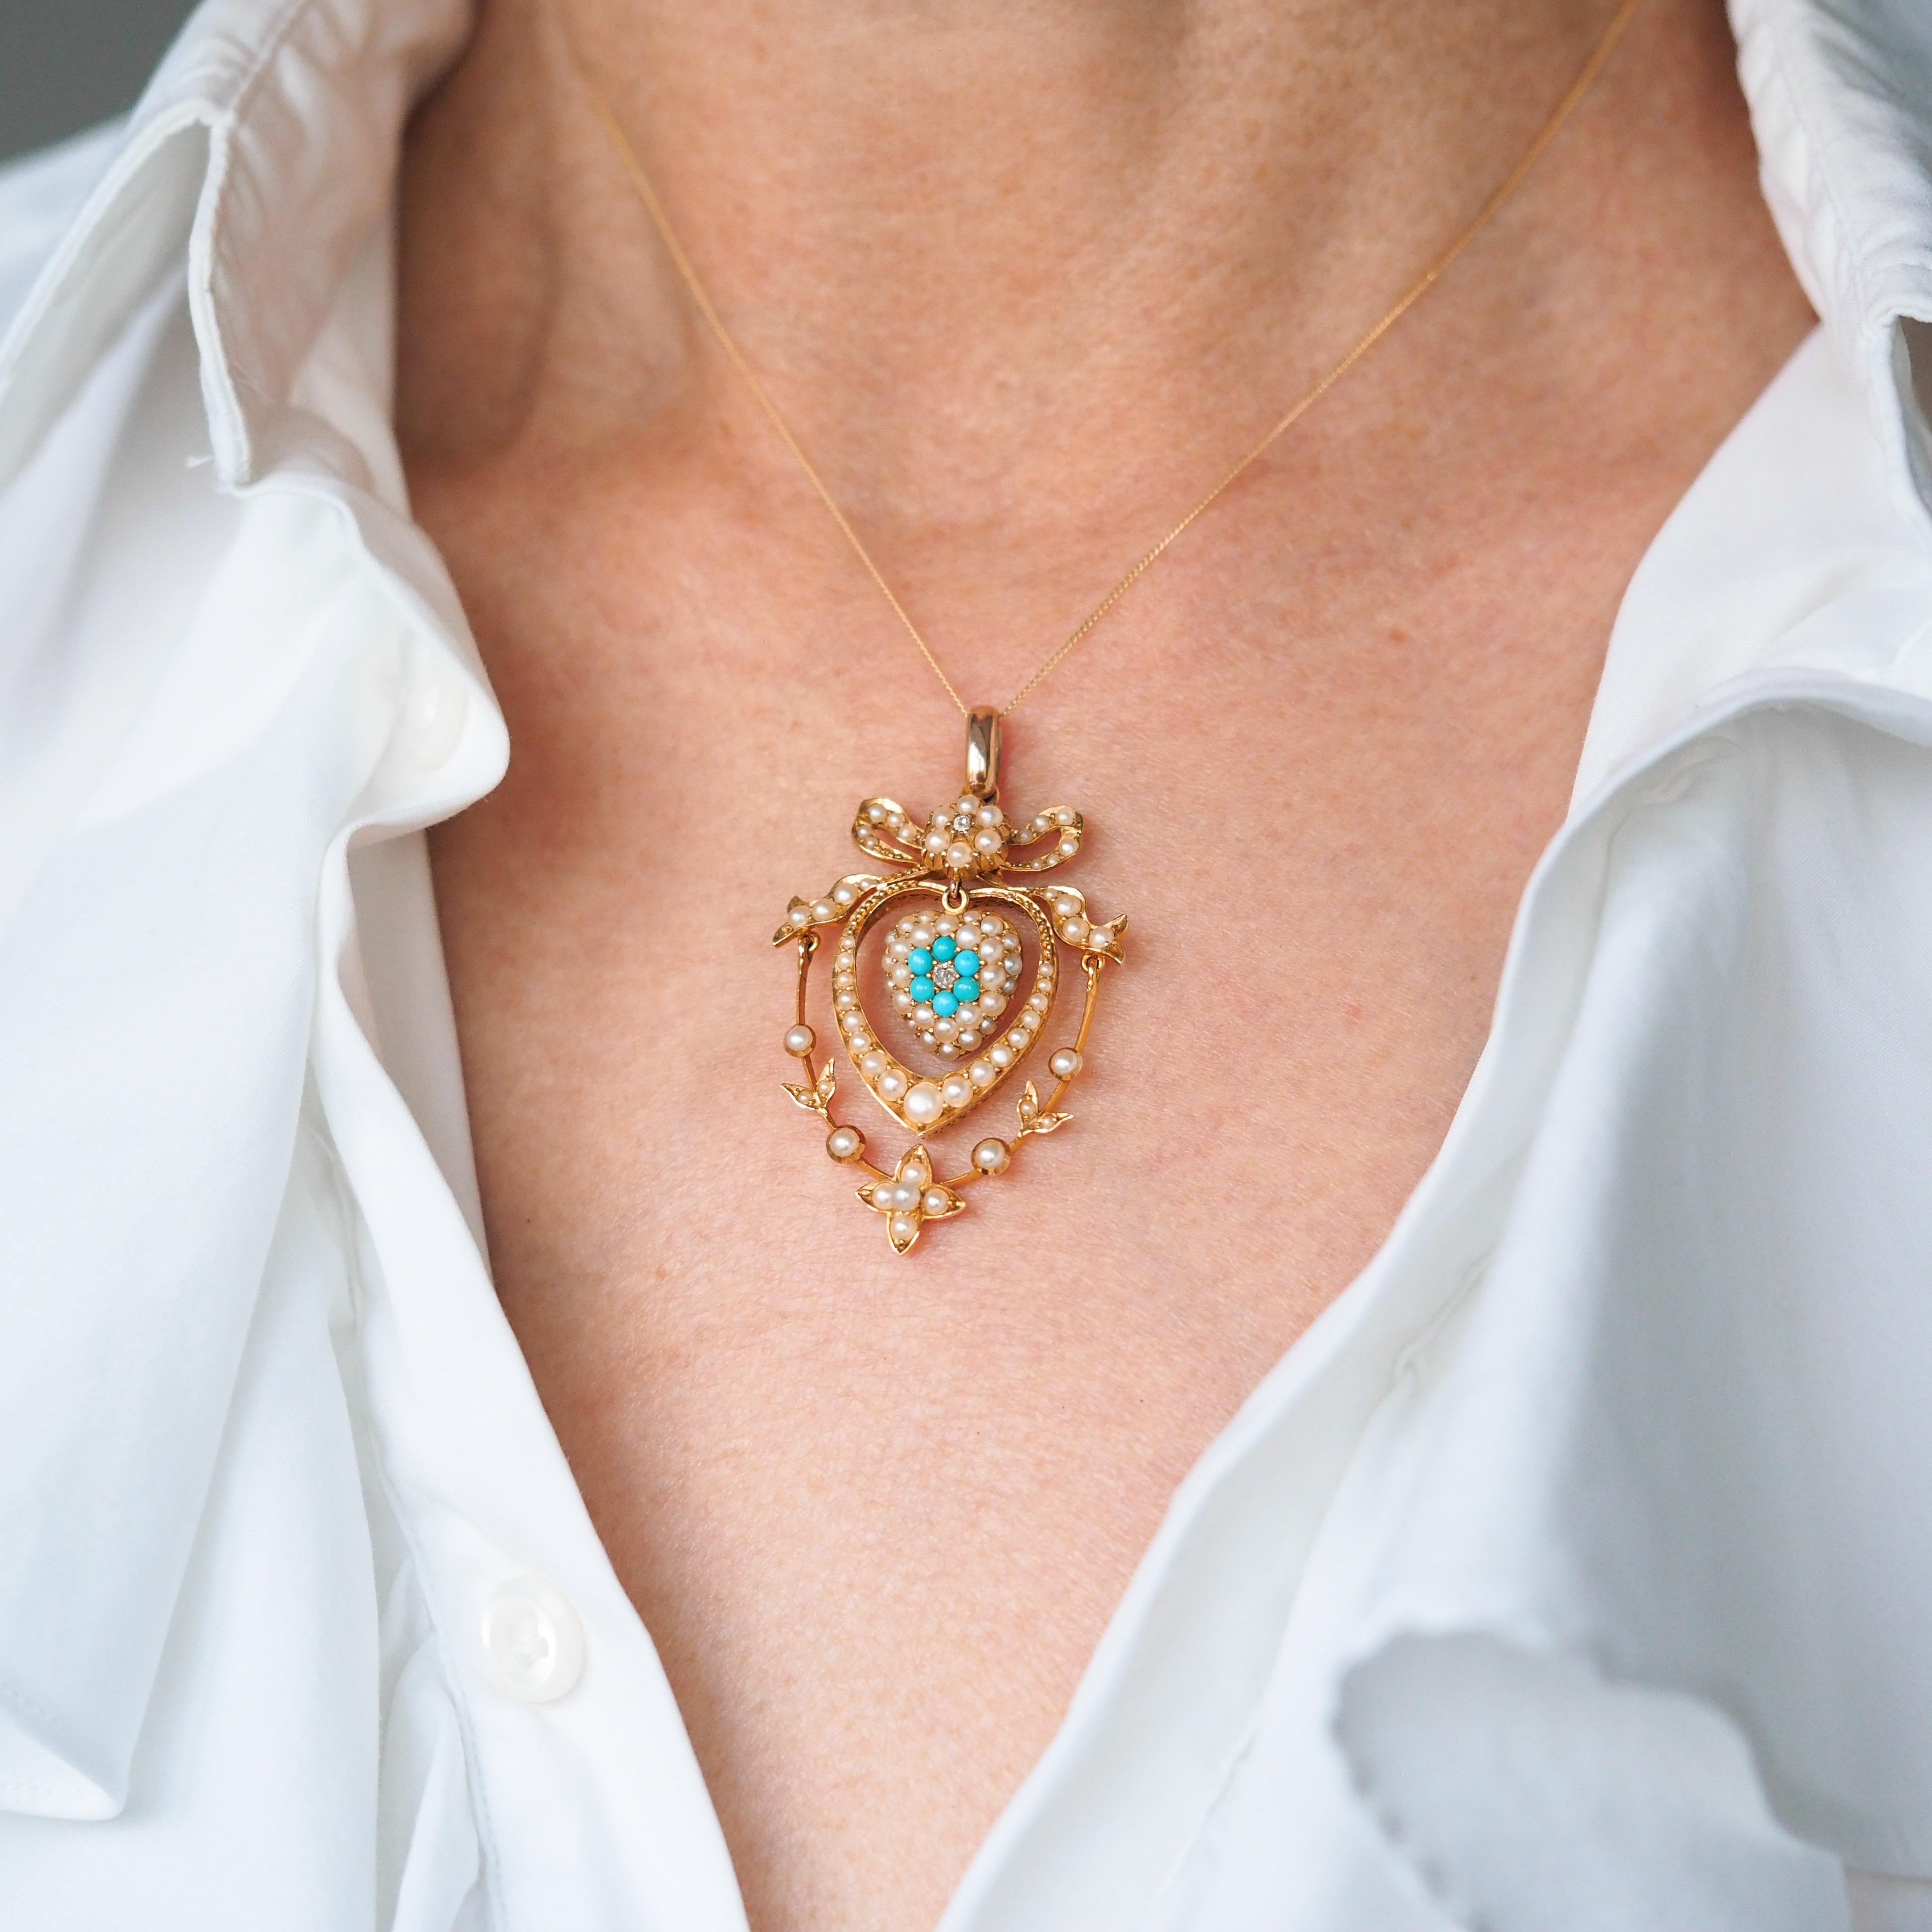 Antique Edwardian 15K Gold Turquoise Diamond & Seed Pearl Pendant Necklace c1910 For Sale 3